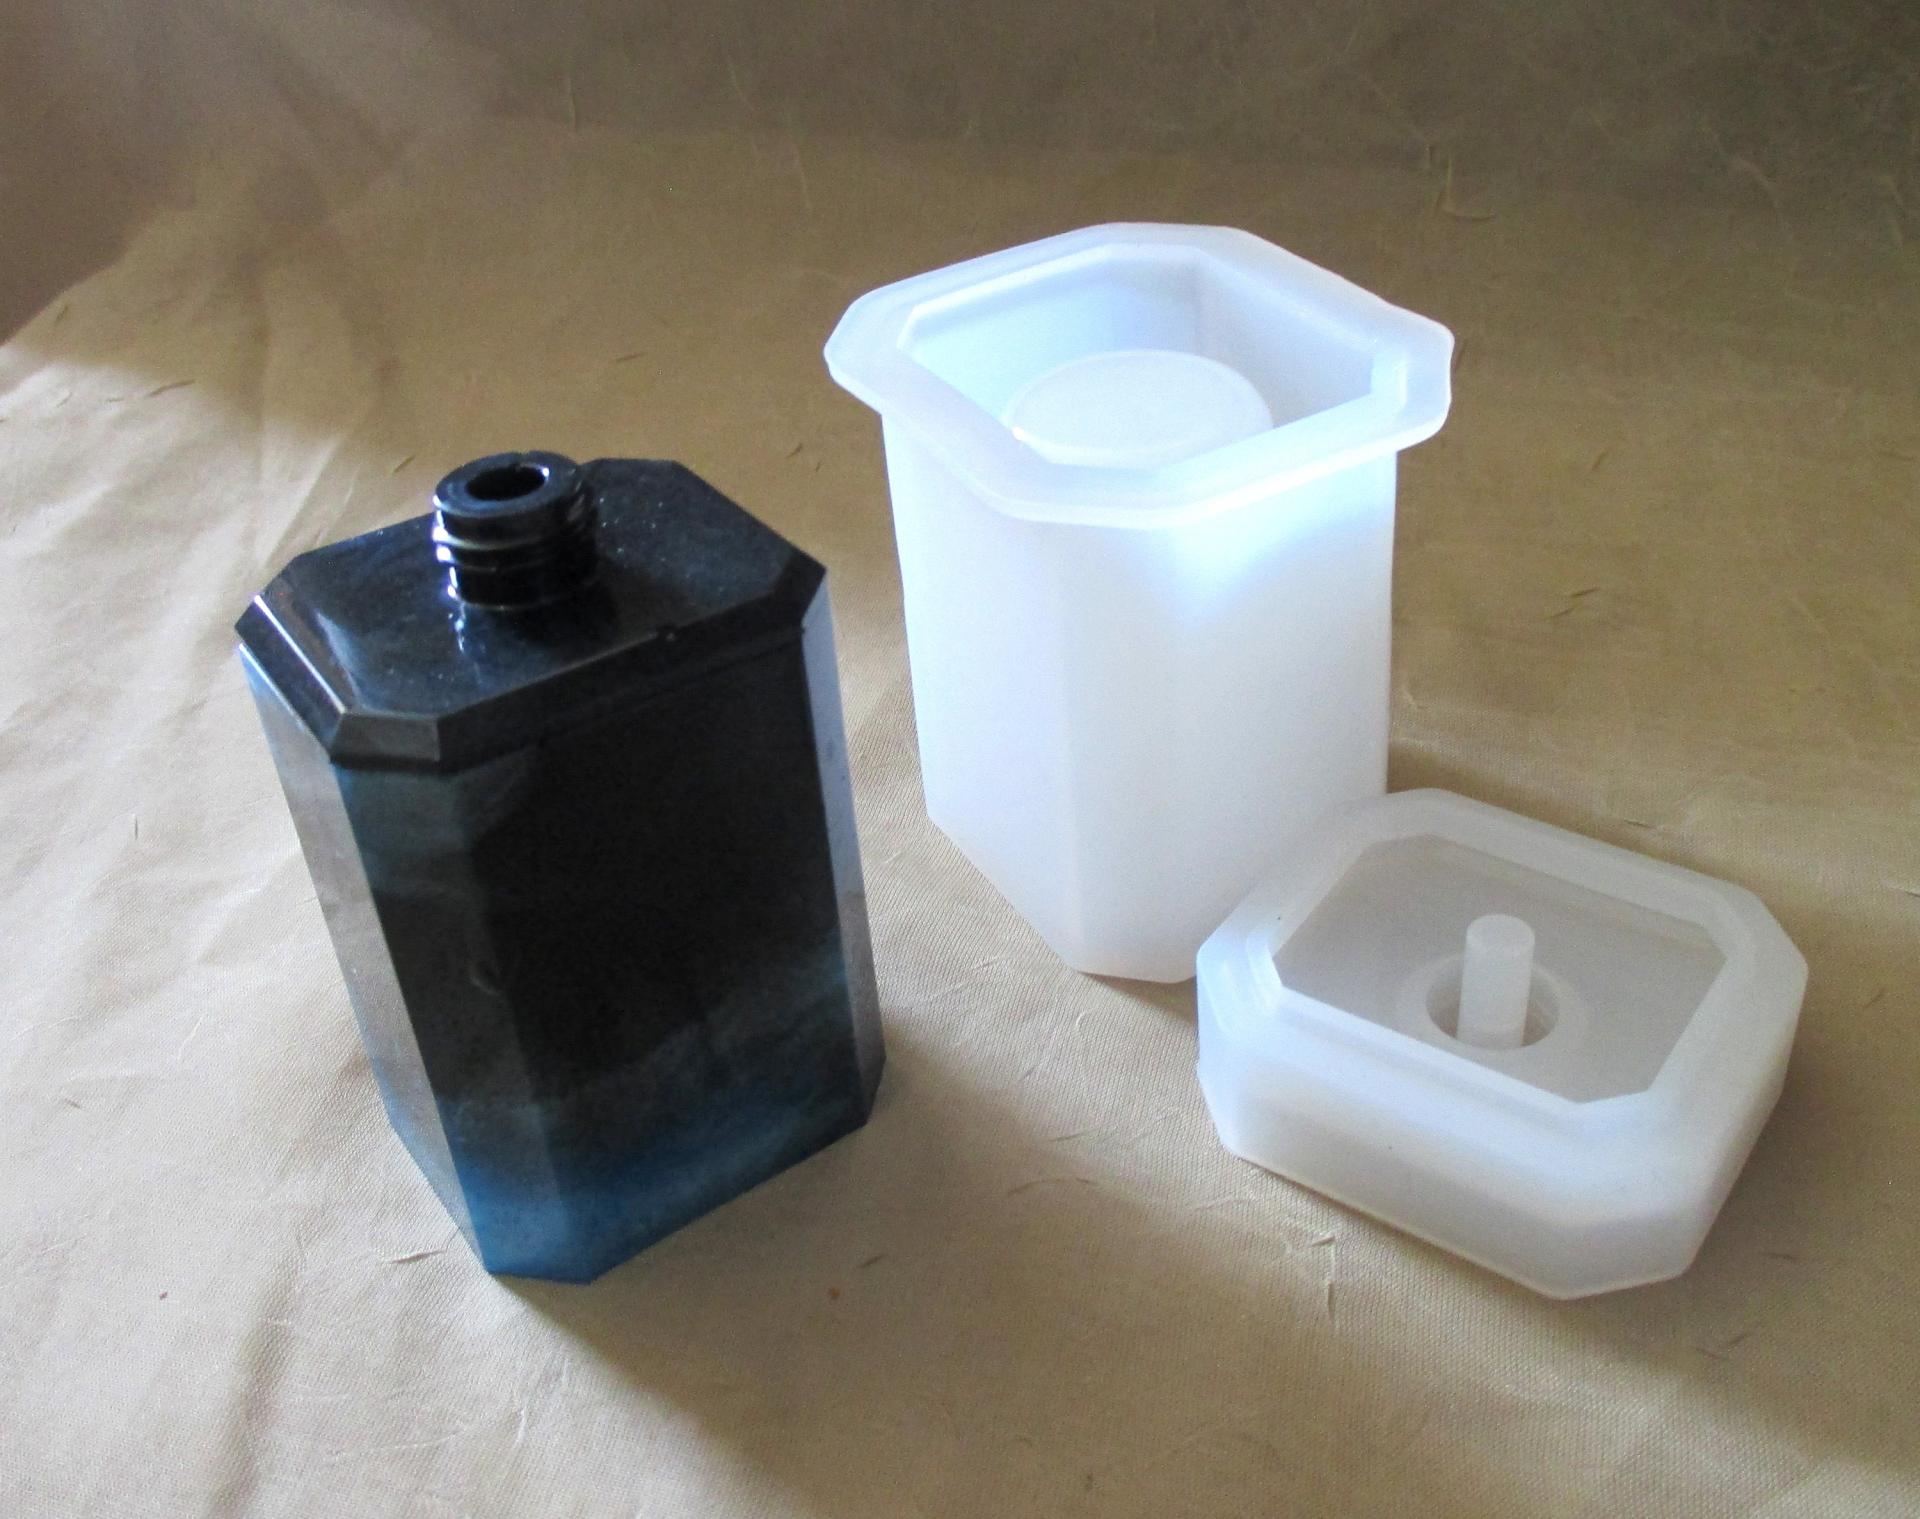 Mold - Perfume Bottle Casting Mold - for Epoxy, Clay or other casting medium